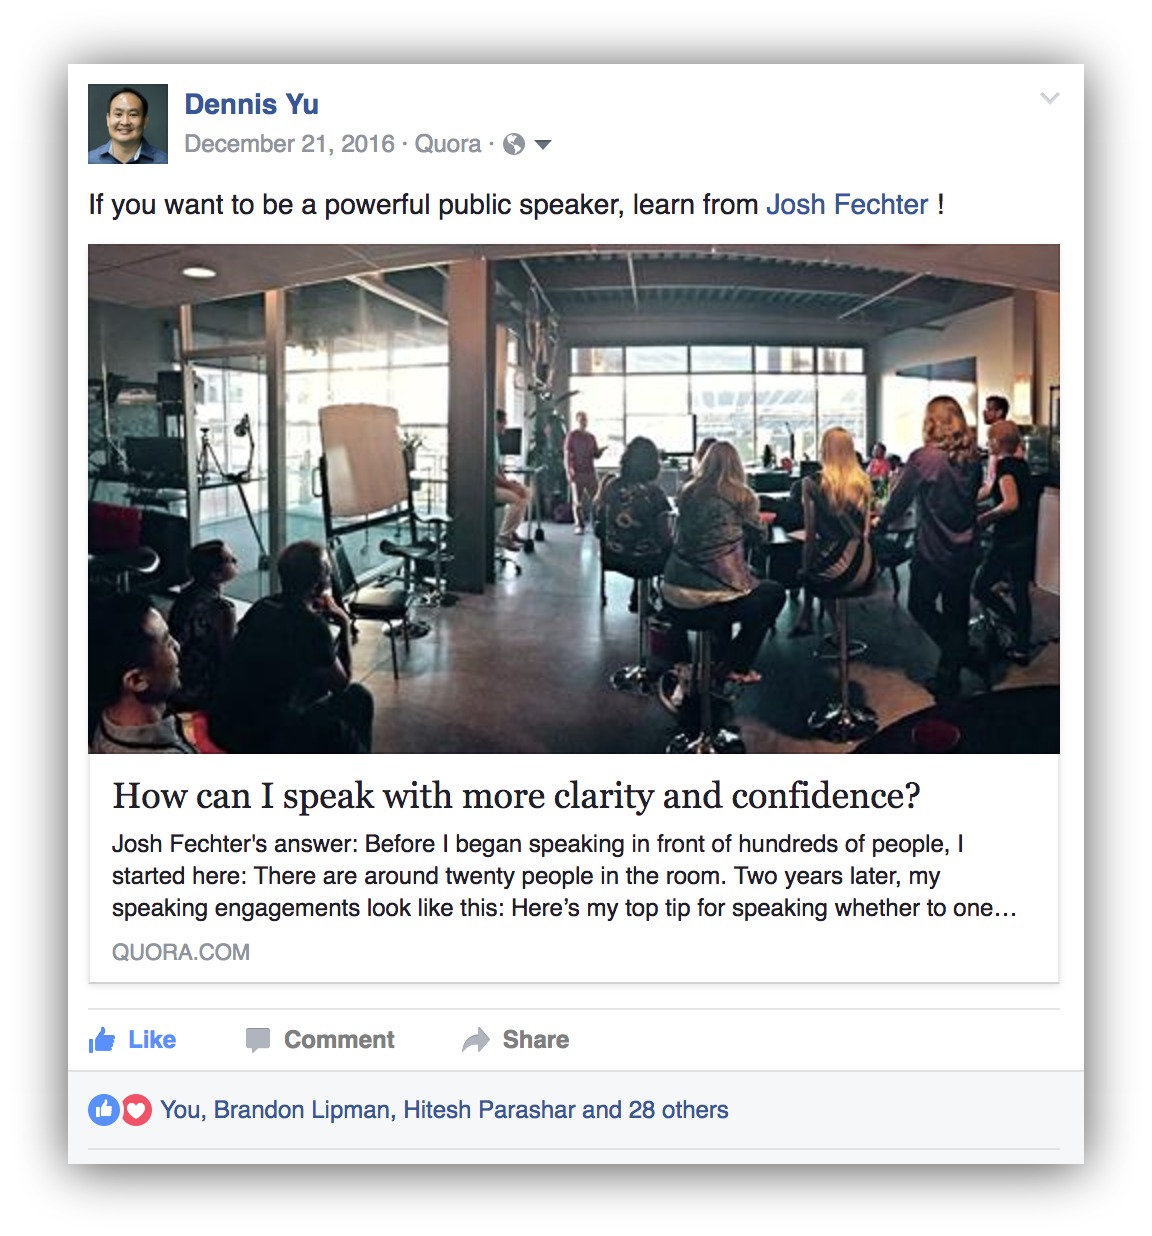 Screenshot showing a Facebook post linking to a Quora question